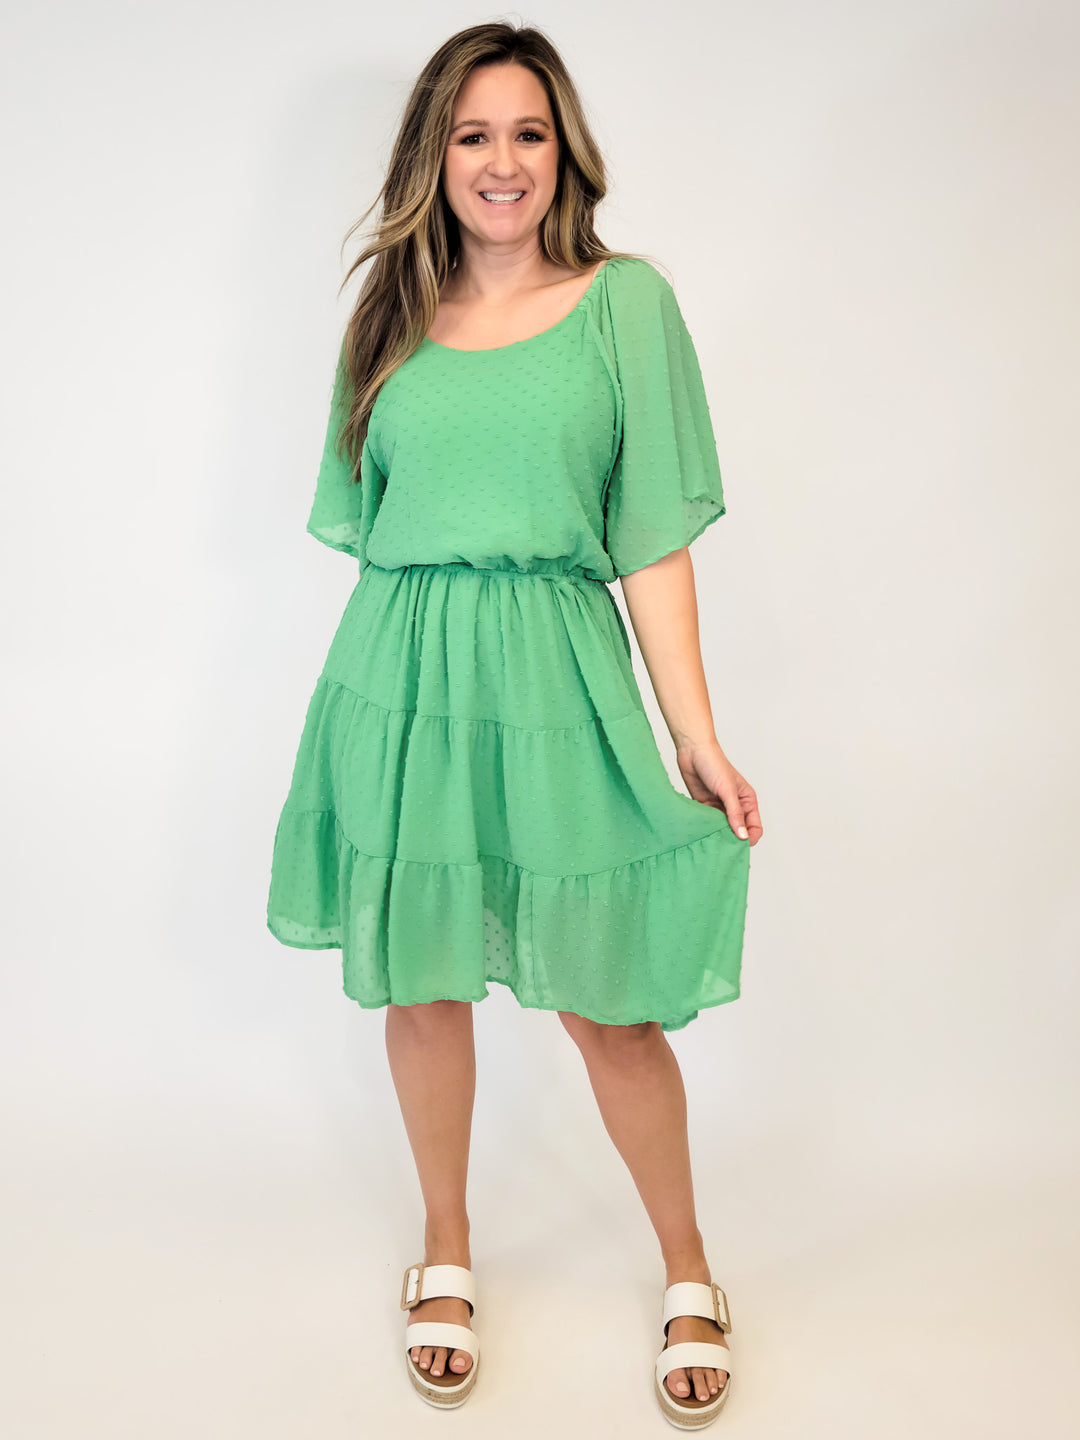 SWISS DOT LINED SHORT DRESS WITH SLEEVES - SWEET MINT